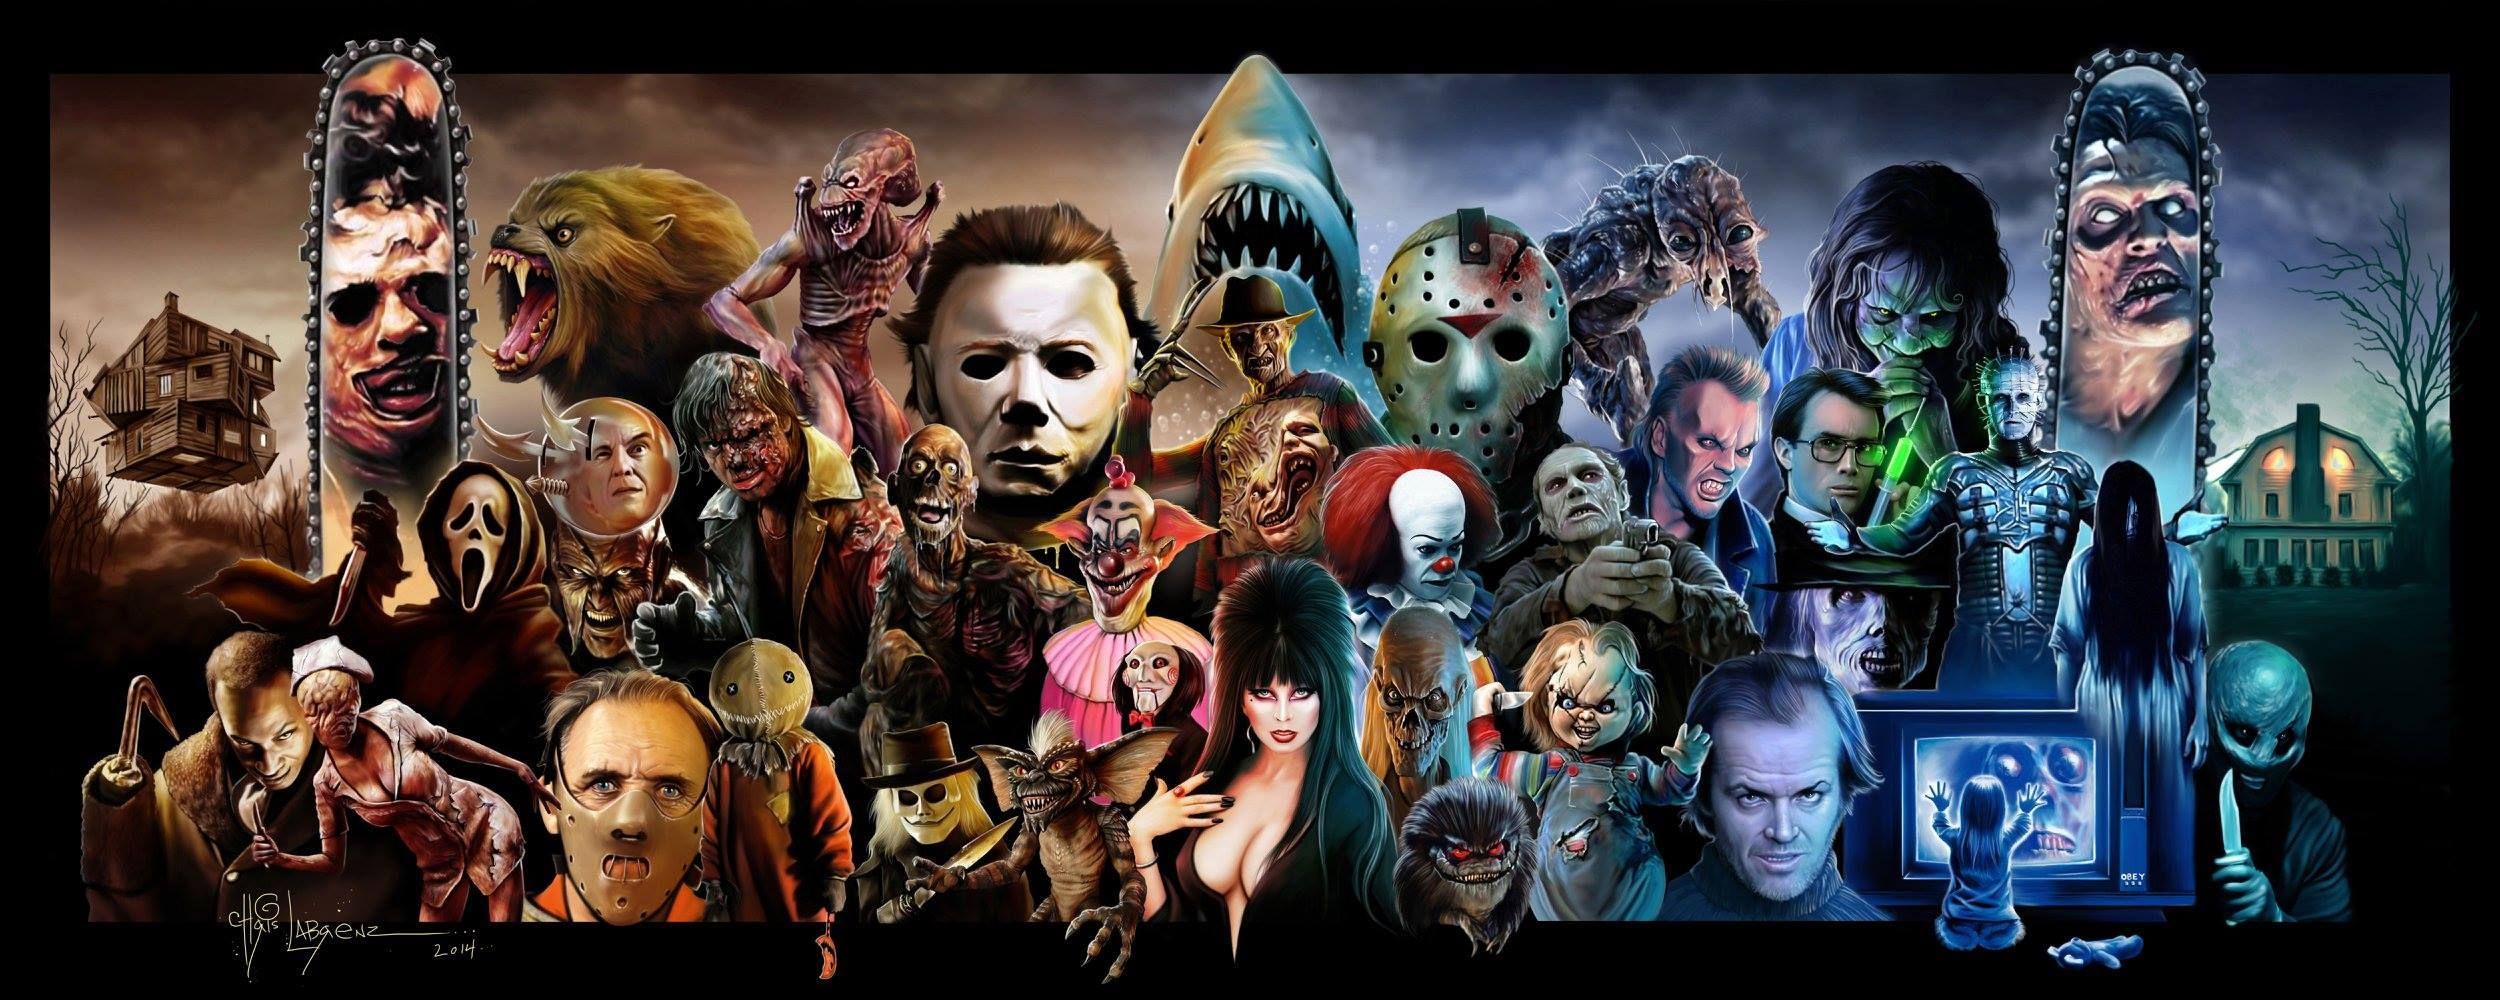 Classic Horror Movies Wallpapers Hd.